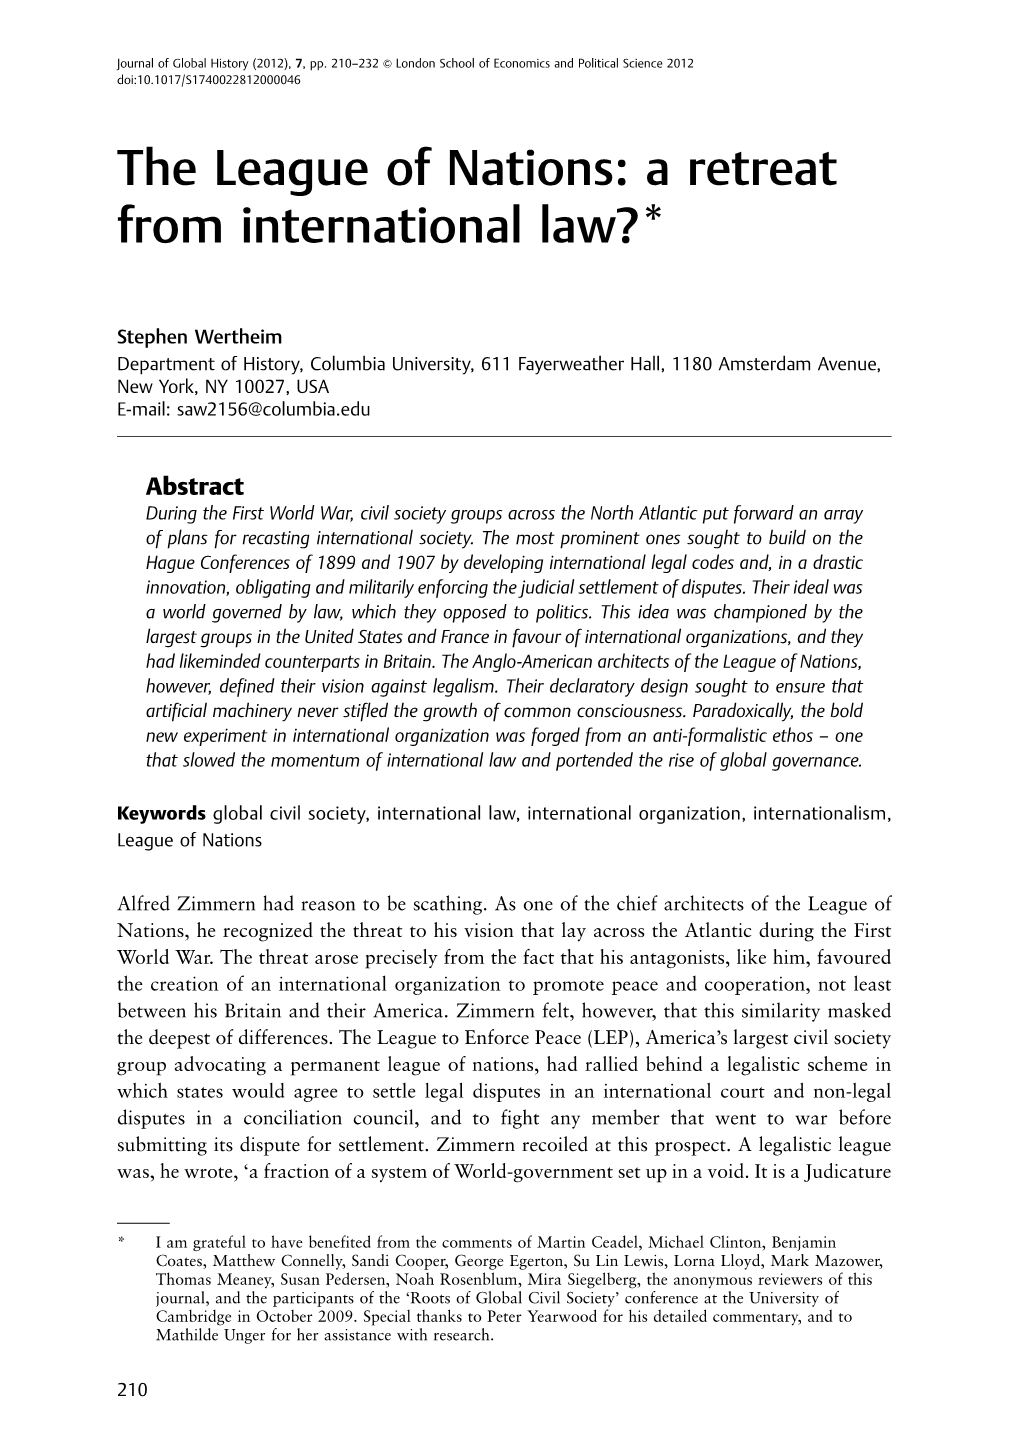 The League of Nations: a Retreat from International Law?*